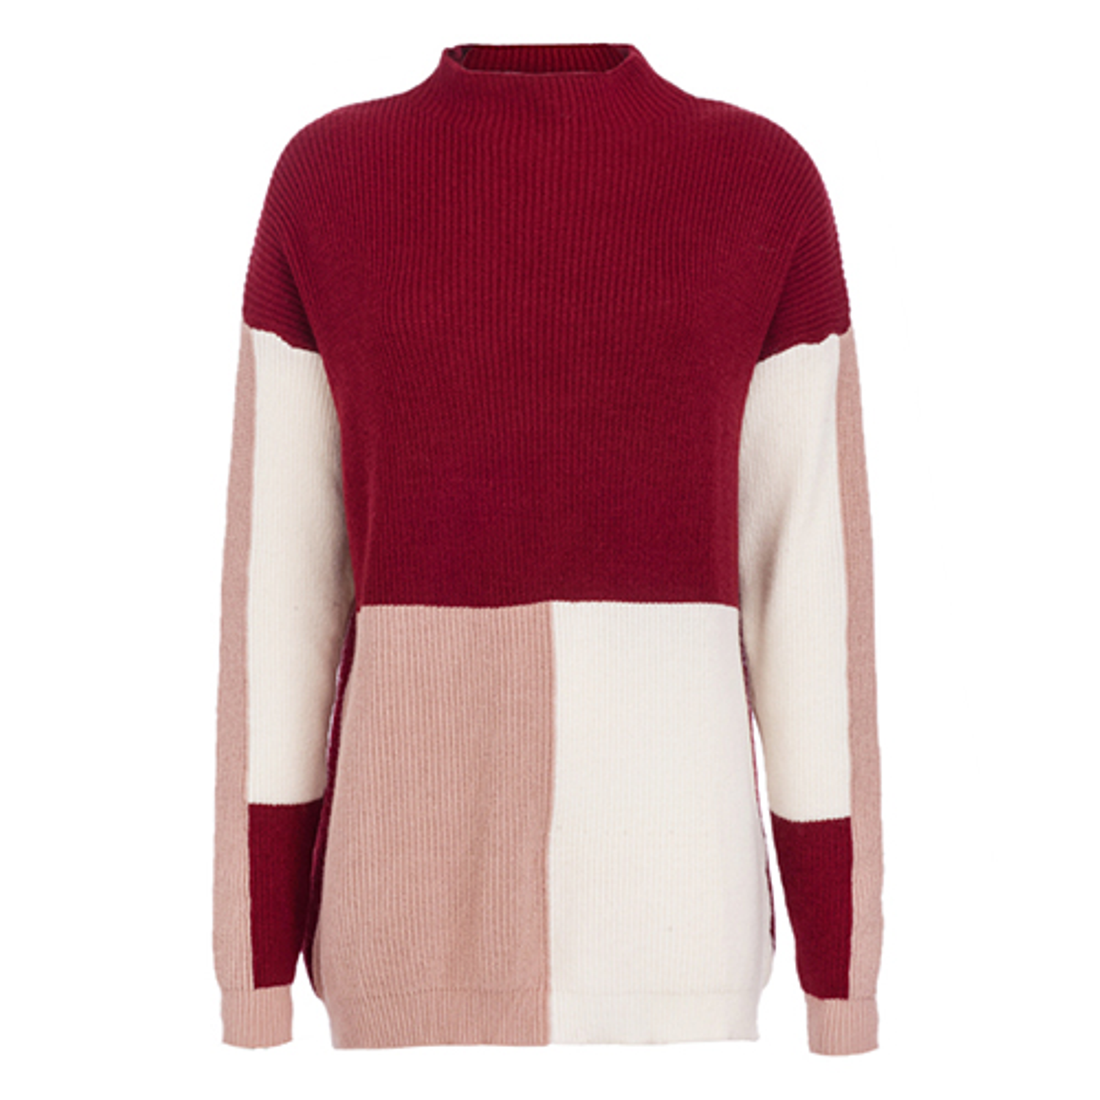 Women's Autumn/Winter Casual O-Neck Knitted Sweater